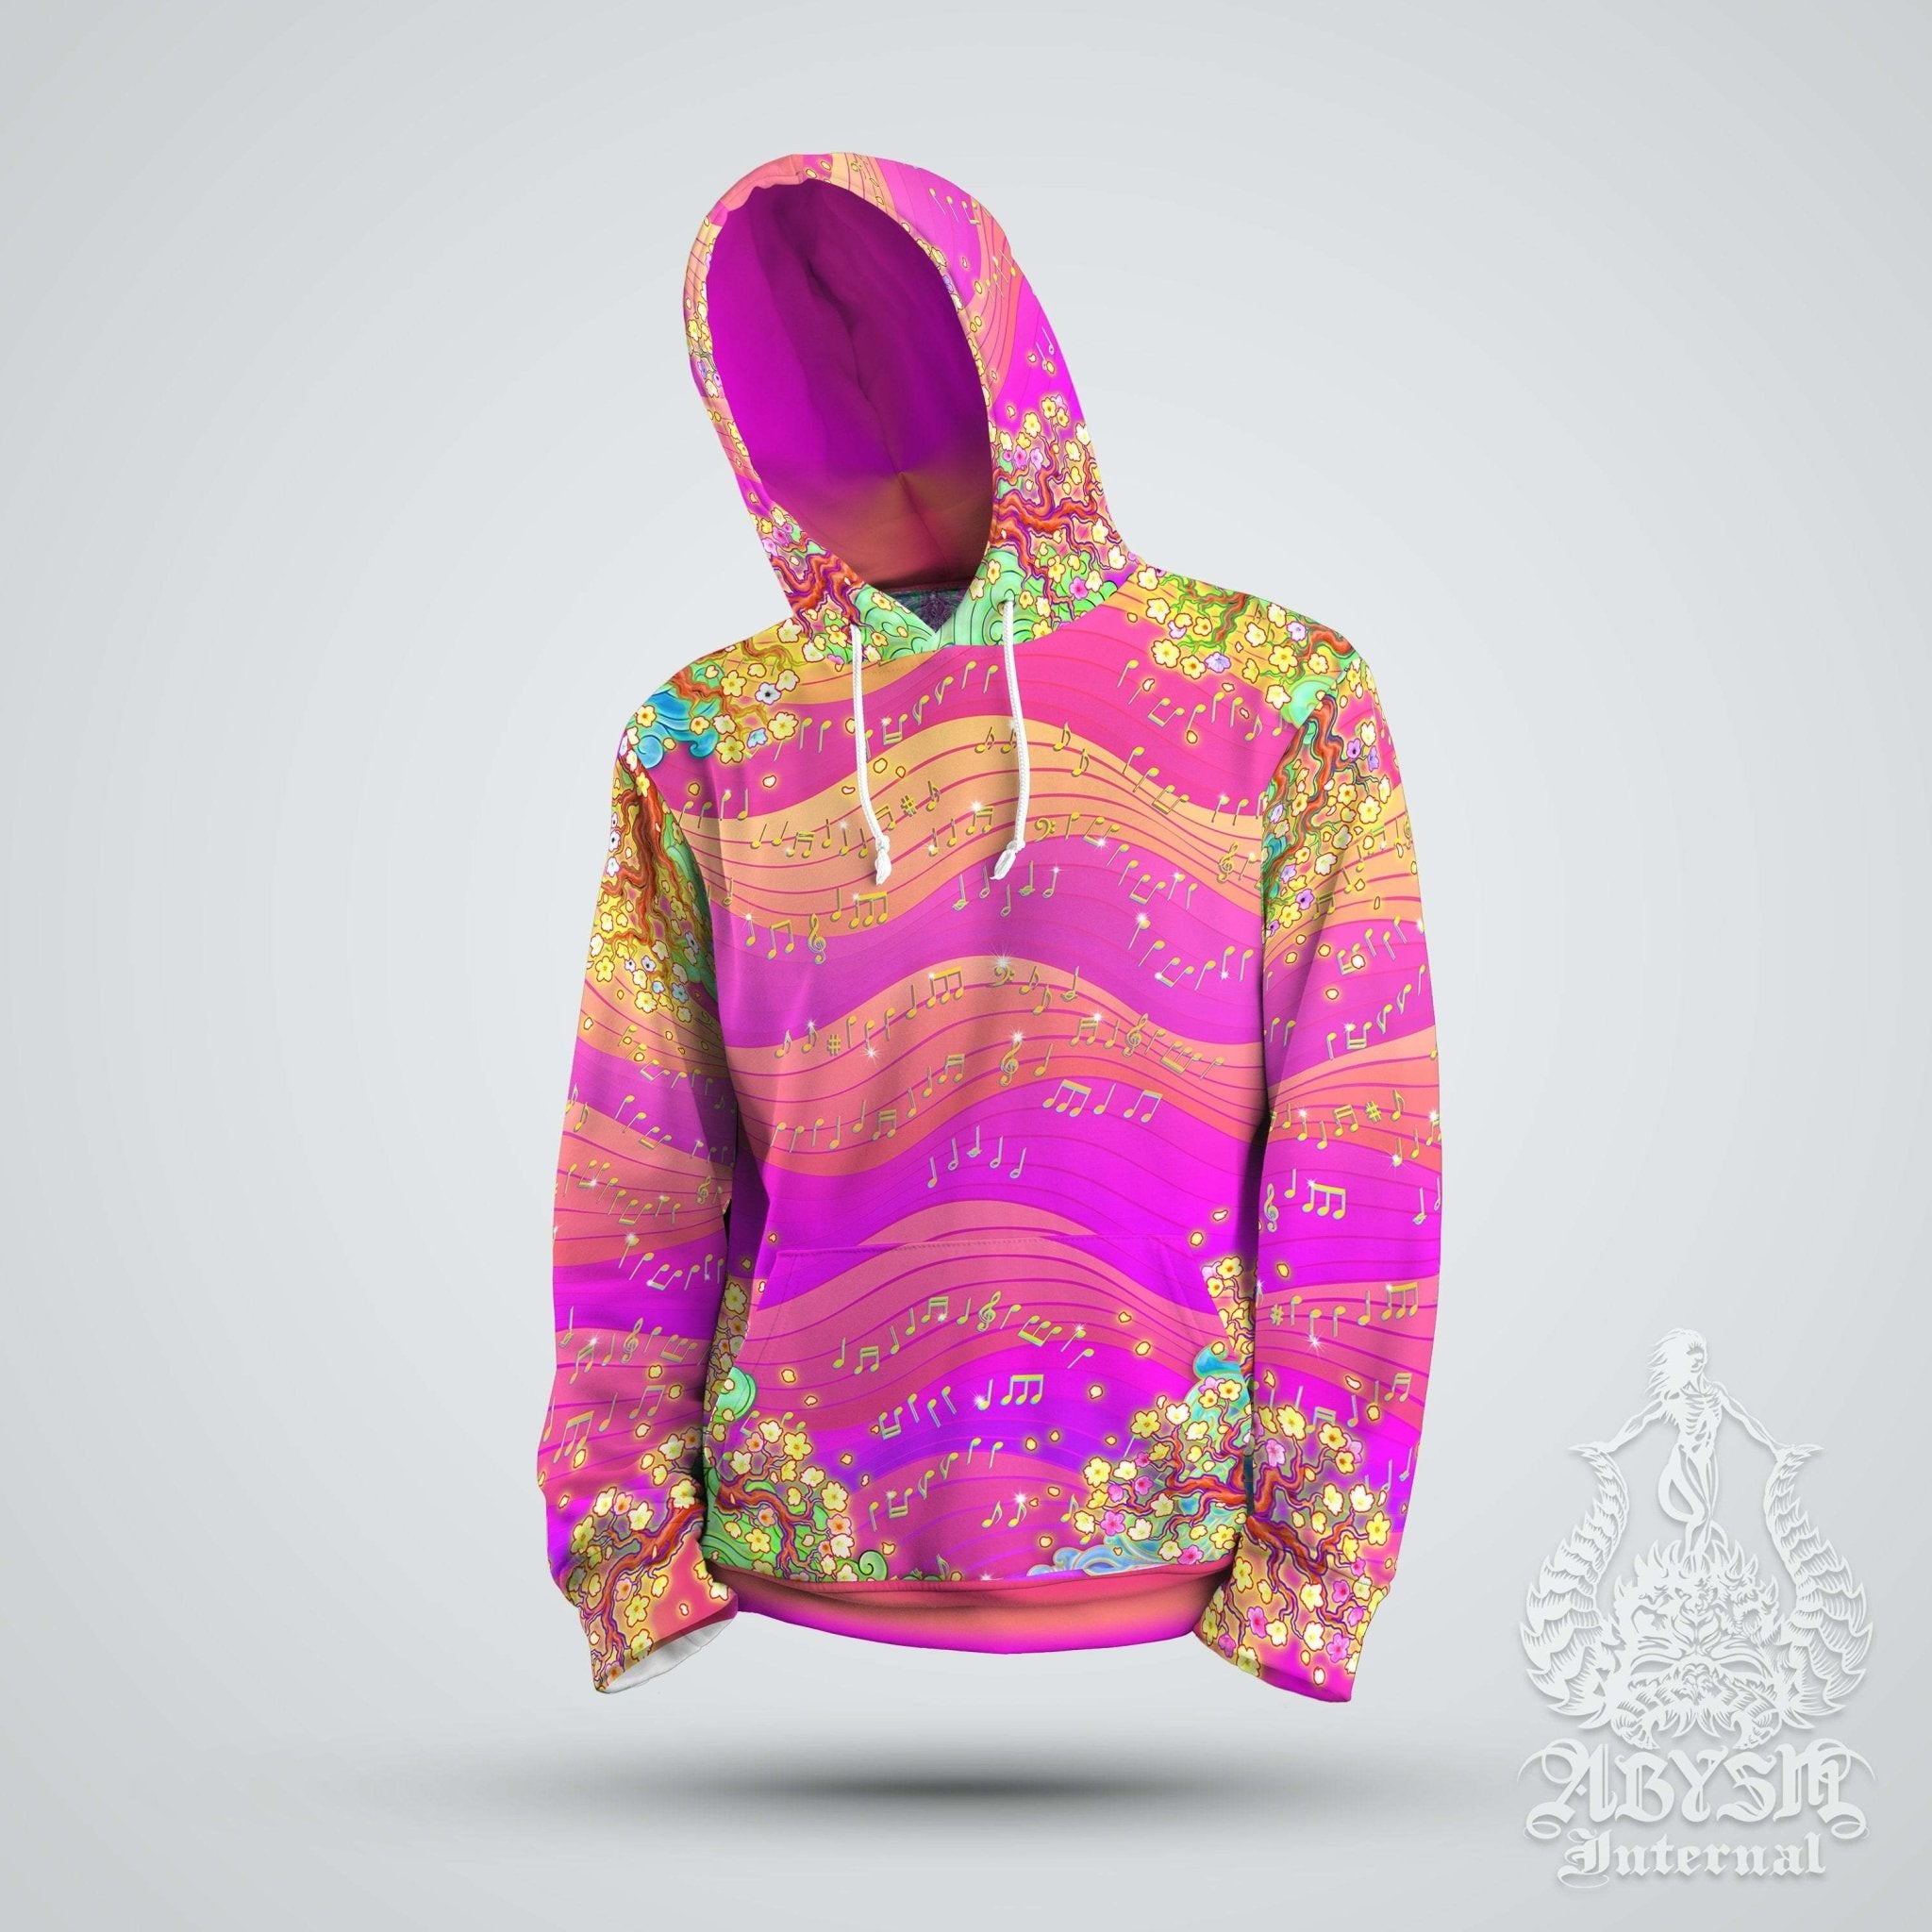 Trippy Hoodie, Women's Rave Outfit, Psychedelic Streetwear, Psy Music Festival Sweater, Alternative Clothing, Unisex - Kidcore, Dragon, Treble Clef - Abysm Internal